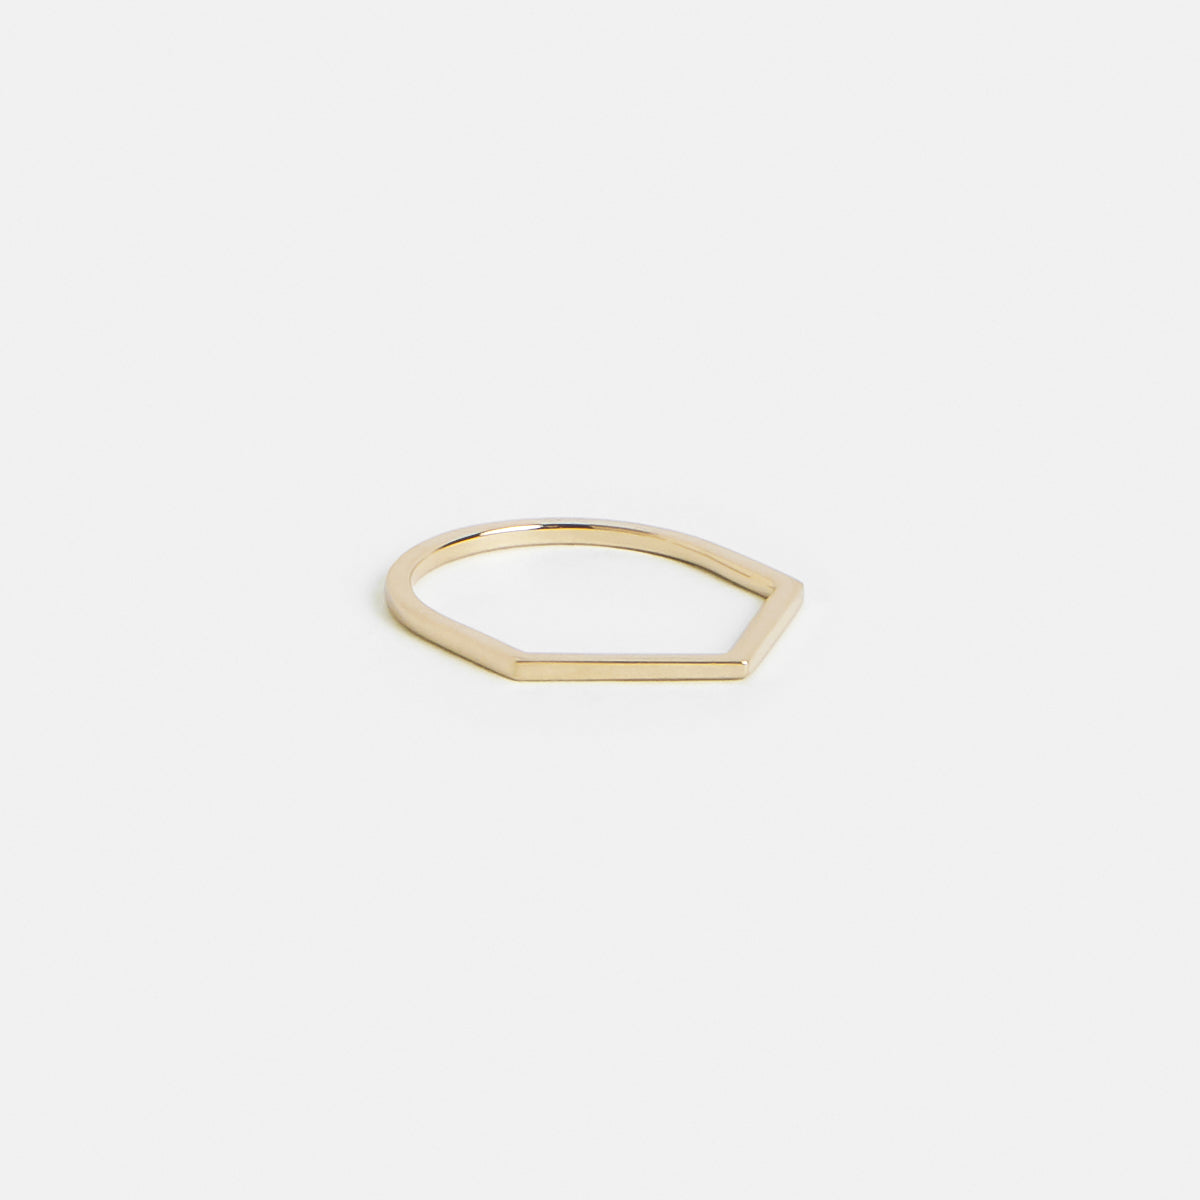 Namas Unconventional Ring in 14k Gold by SHW Fine Jewelry New York City